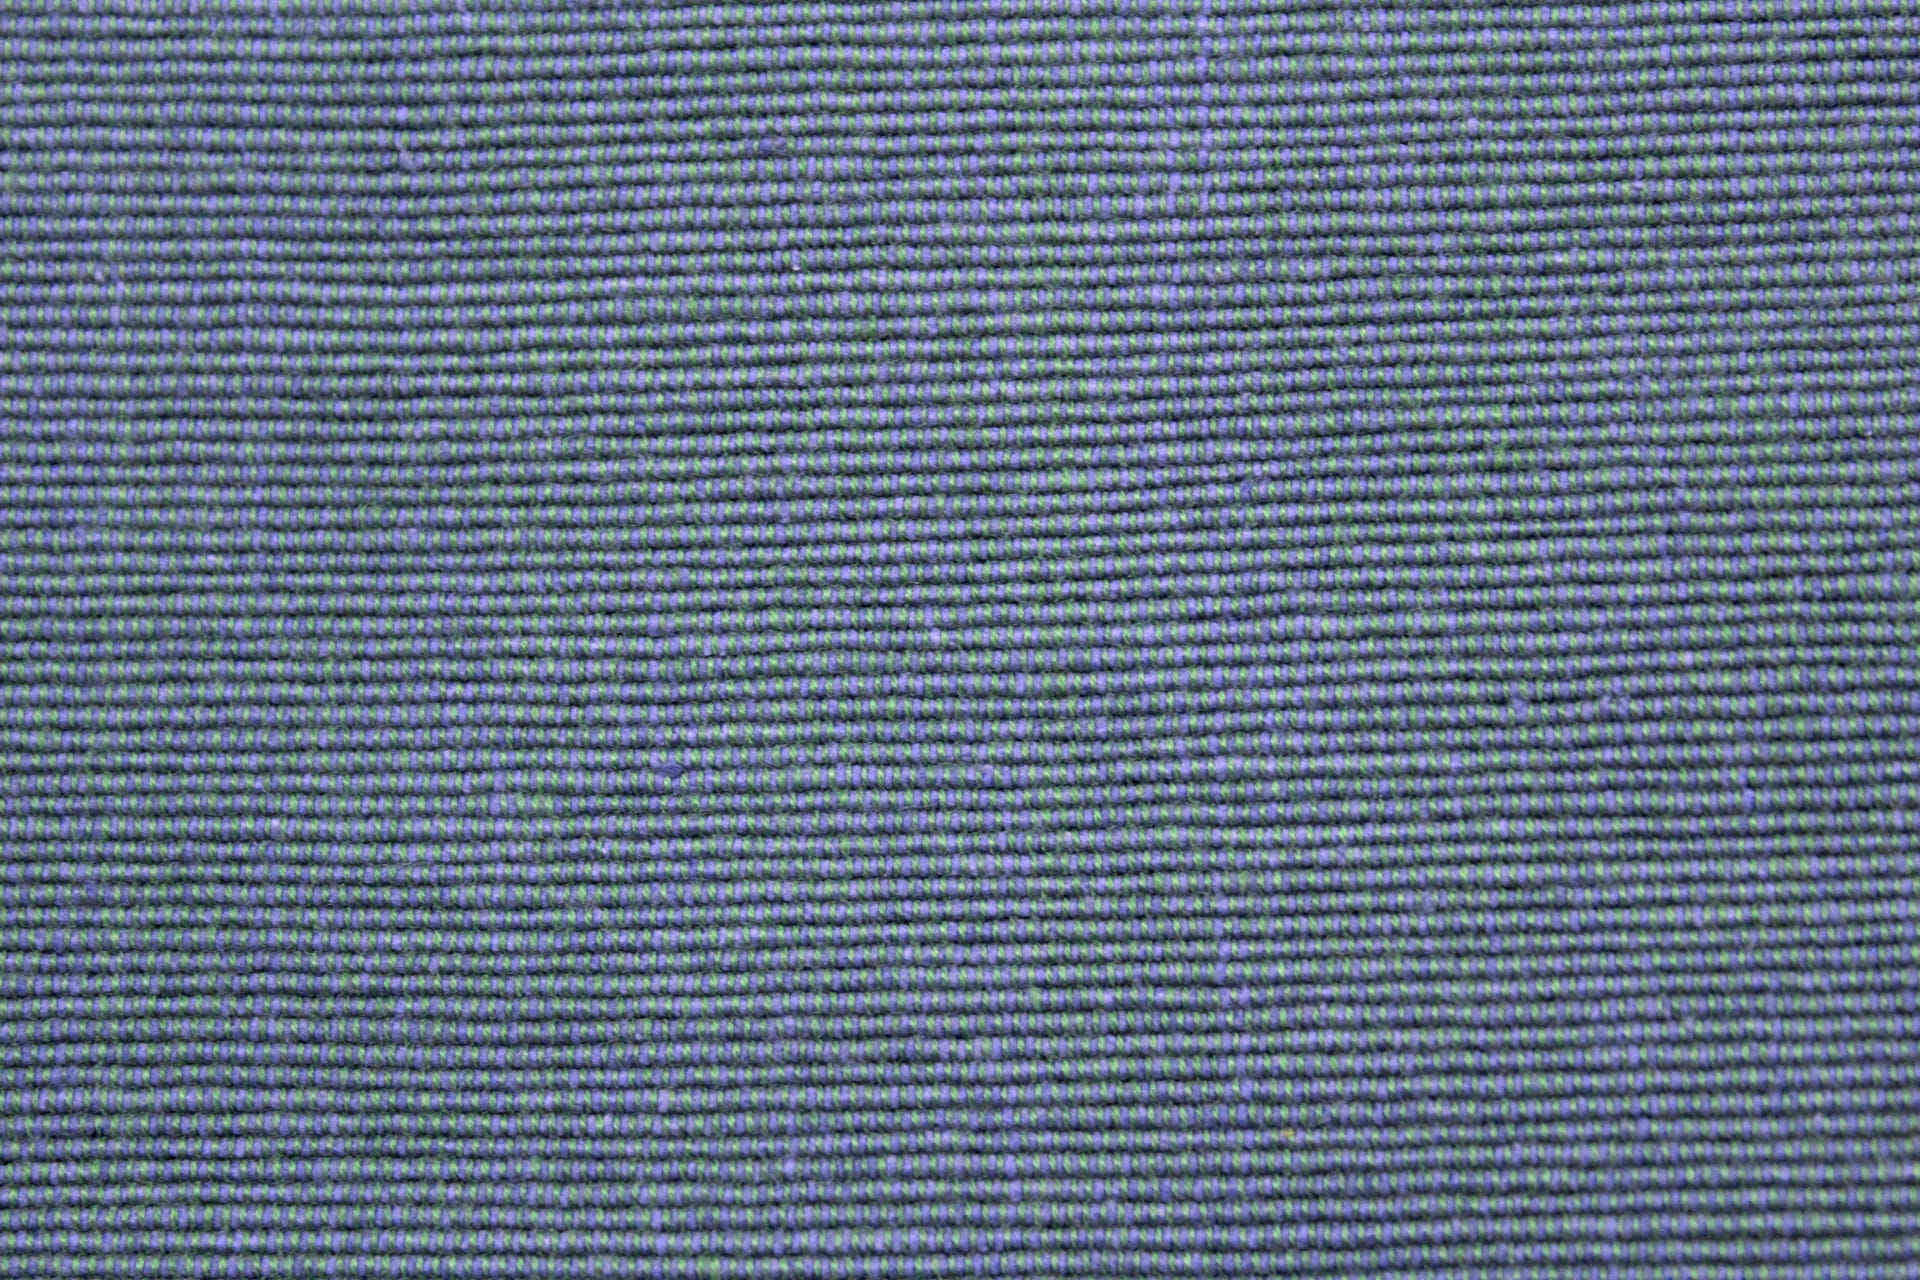 Blue Chambray Handloom Corded Weave 330 GSM Plain Cotton Fabric (122 cms) online in India